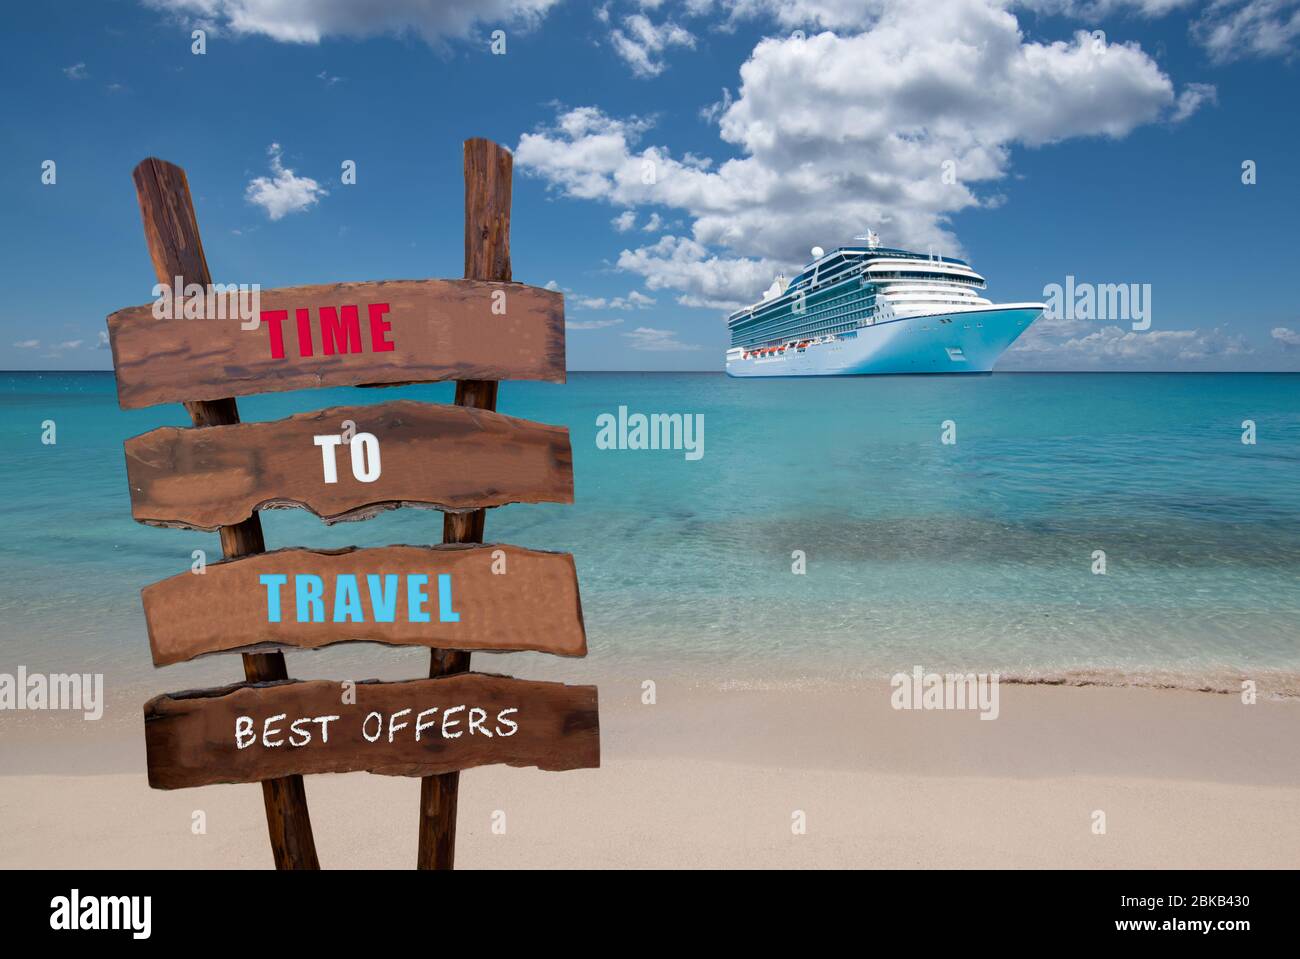 Time to Travel concept. Wooden signpost with text. Best offers for cruise vacations. In the background luxury cruise ship on a beautiful turquoise Car Stock Photo